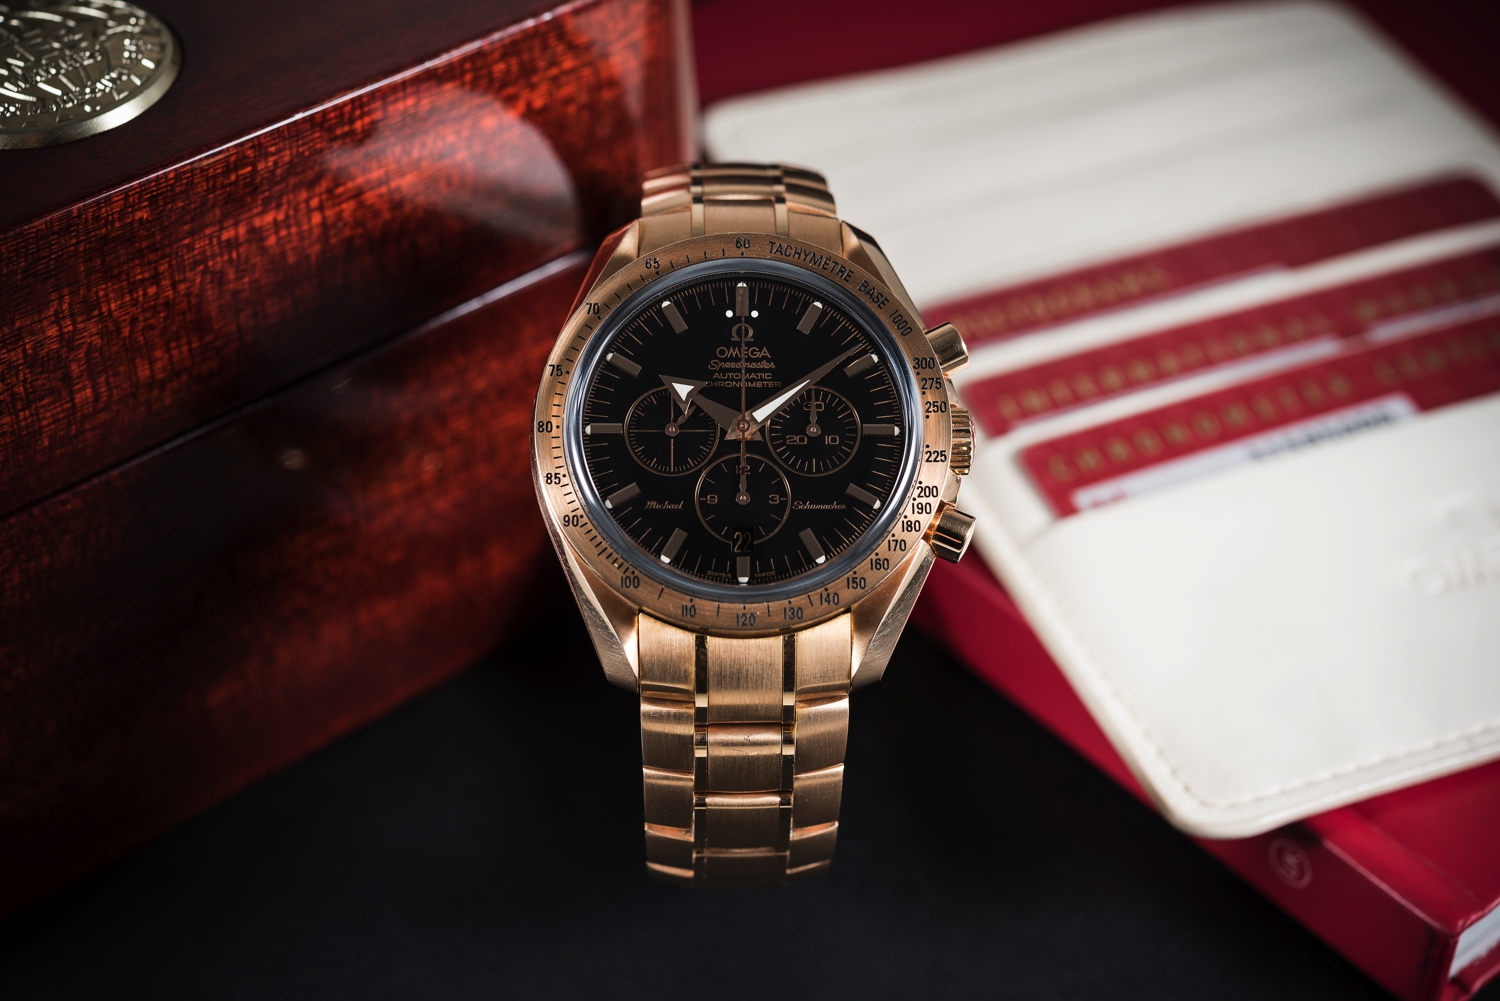 A FINE & RARE GENTLEMAN'S 18K ROSE GOLD OMEGA SPEEDMASTER AUTOMATIC CHRONOGRAPH BRACELET WATCH DATED - Image 2 of 8